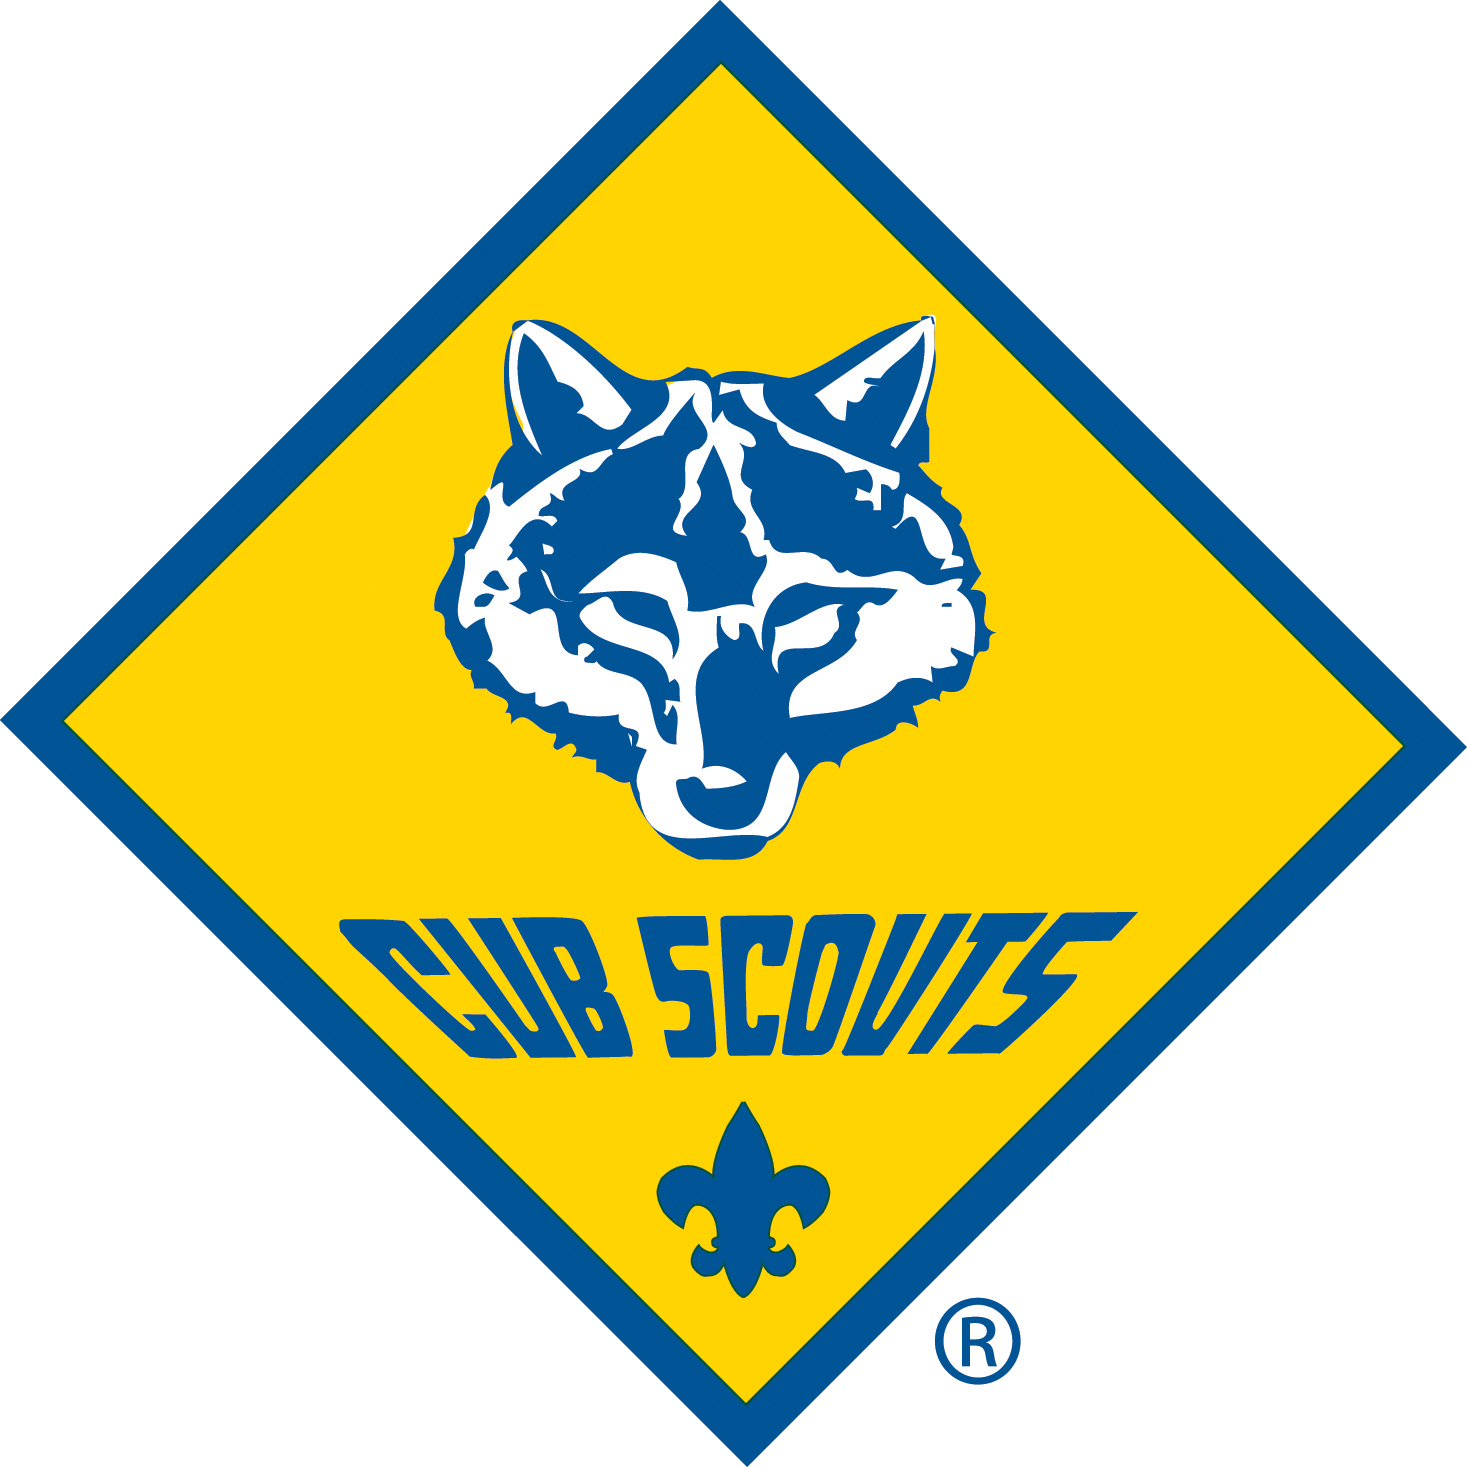 CubScout logo